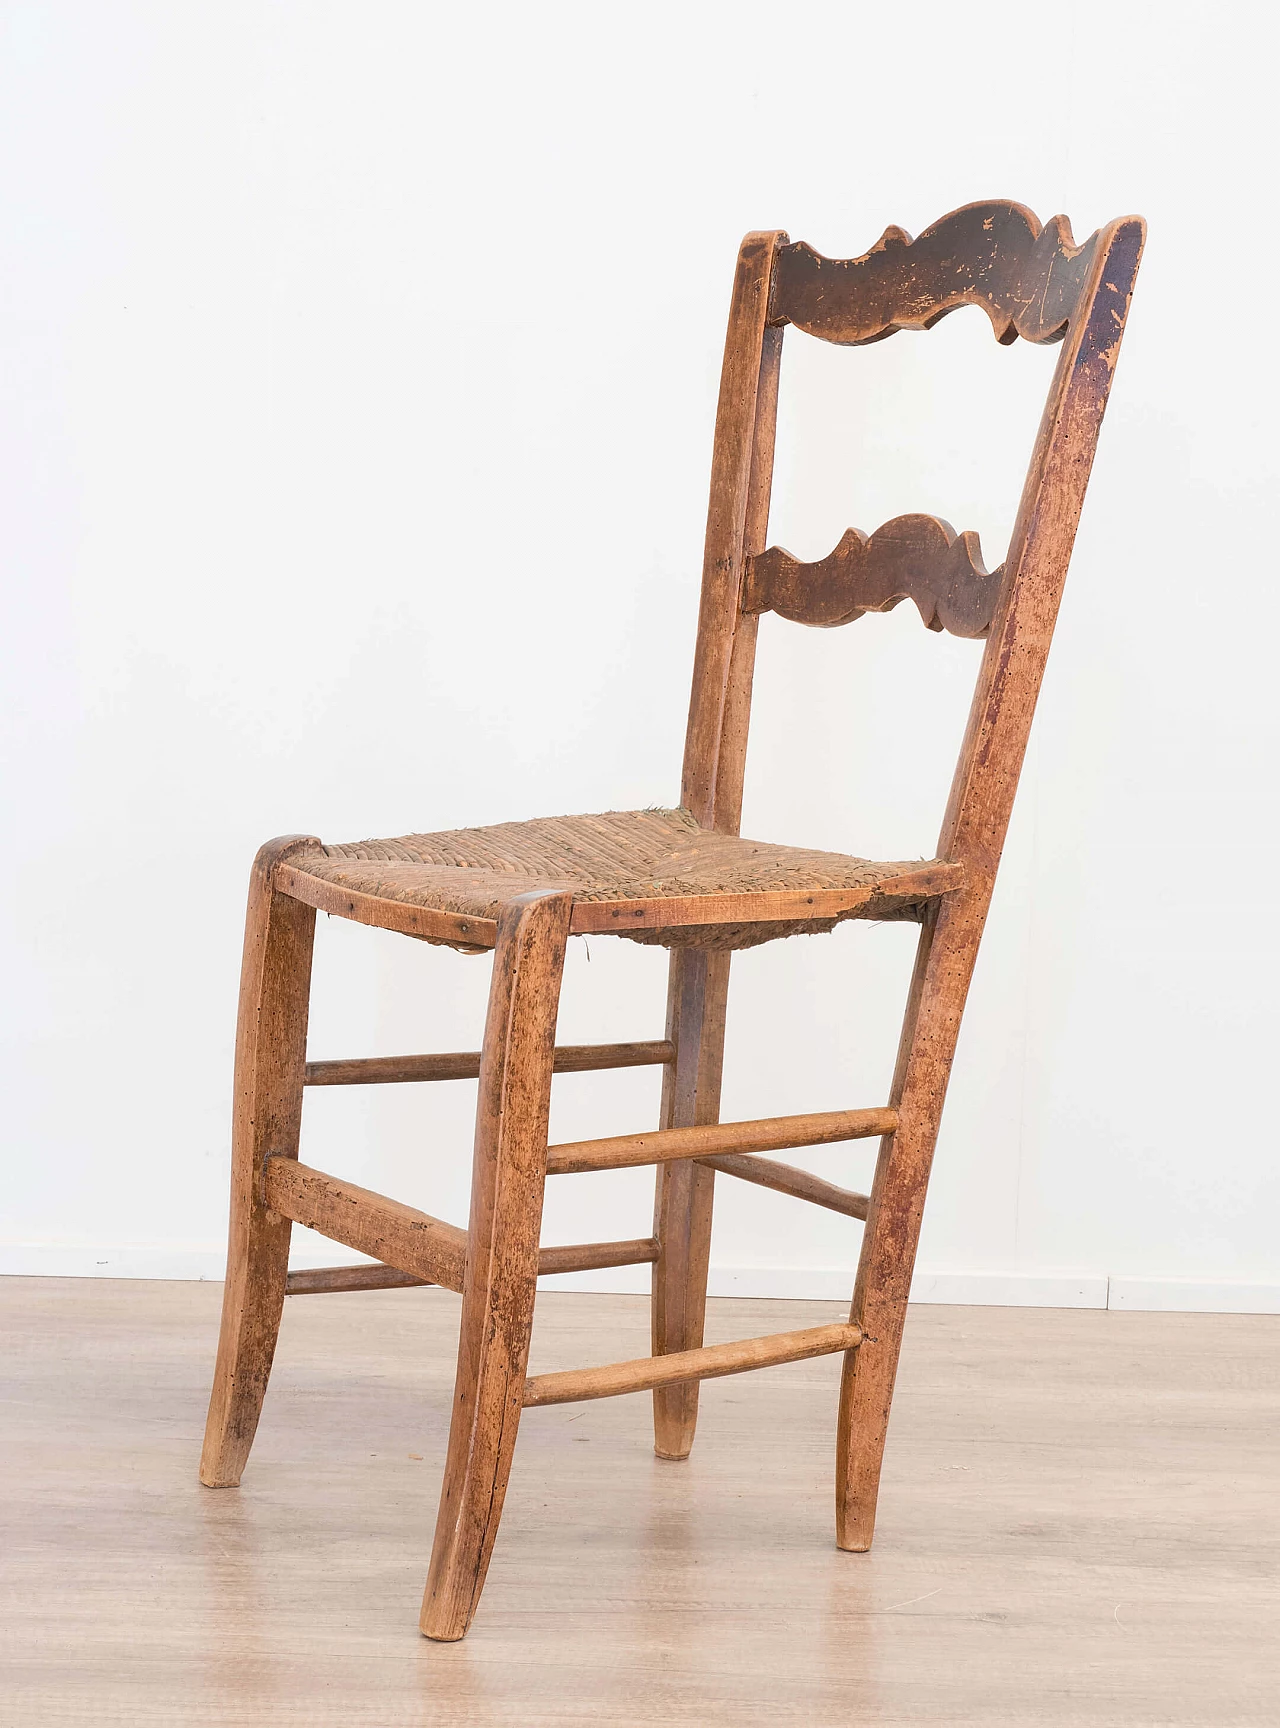 Rustic chair with sabre legs 1084743